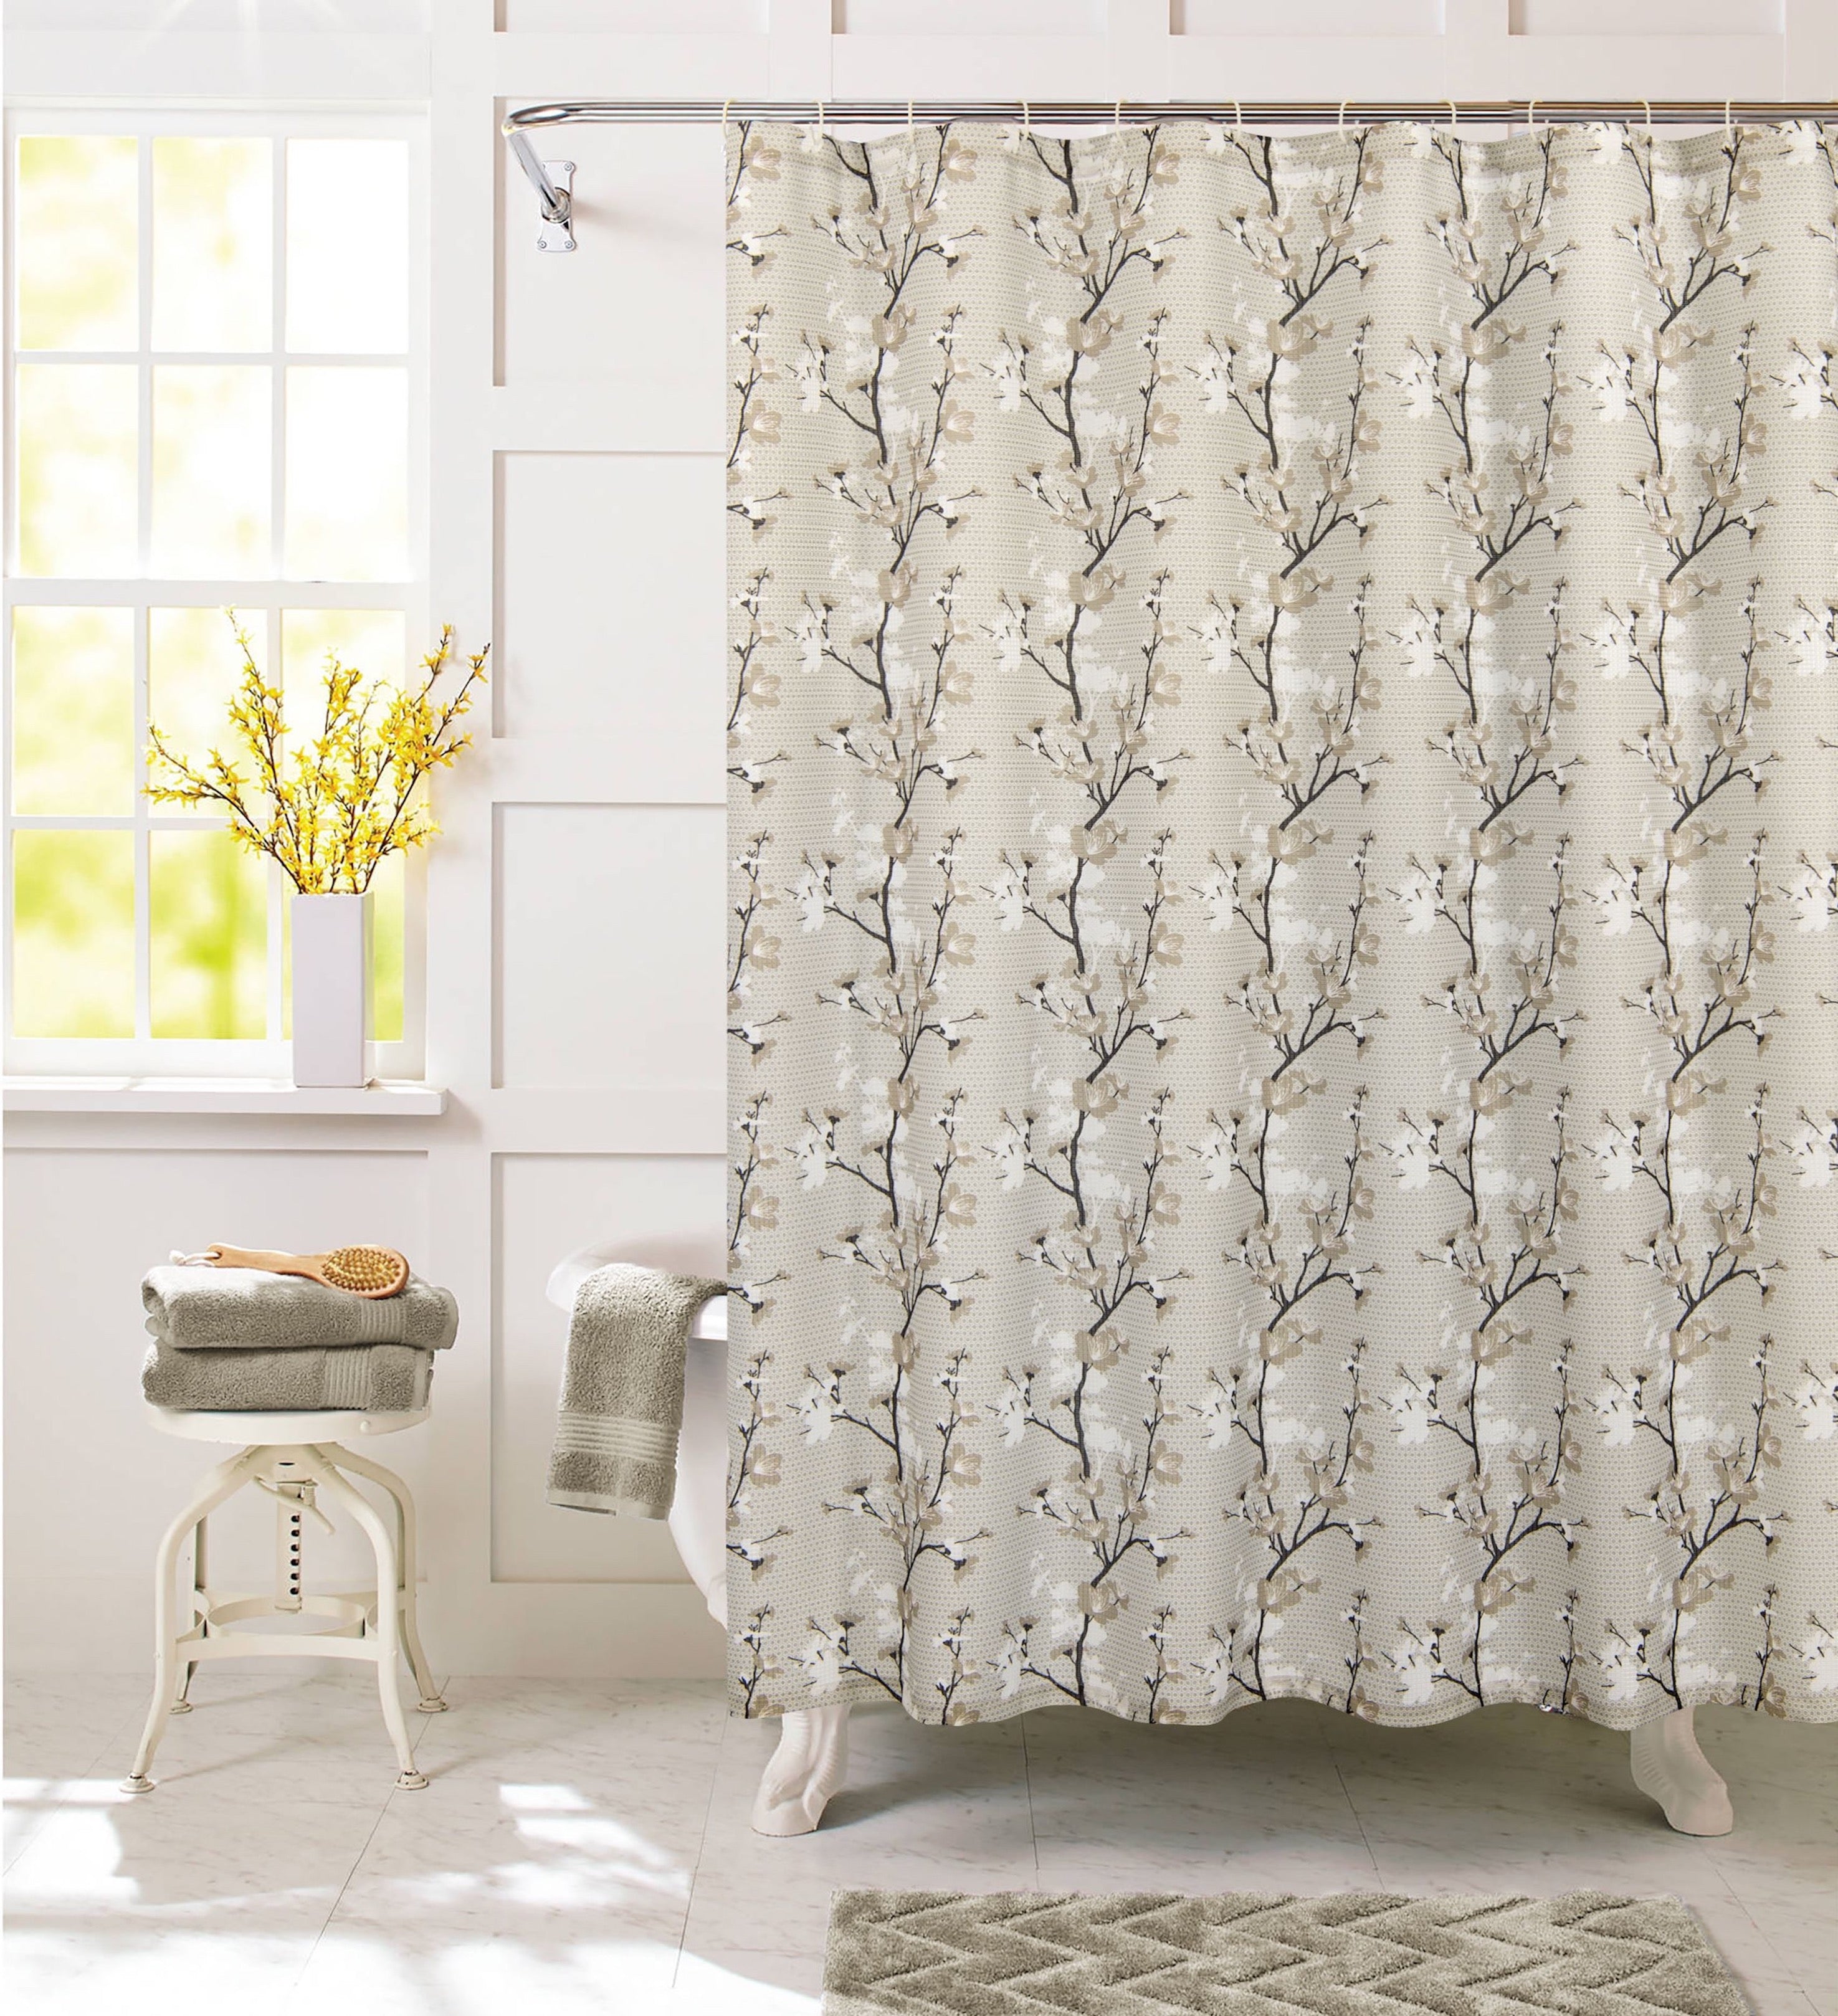 Dainty Home Printed Waffle 3D Textured Waffle Weave Textured Floral Designed Shower Curtain